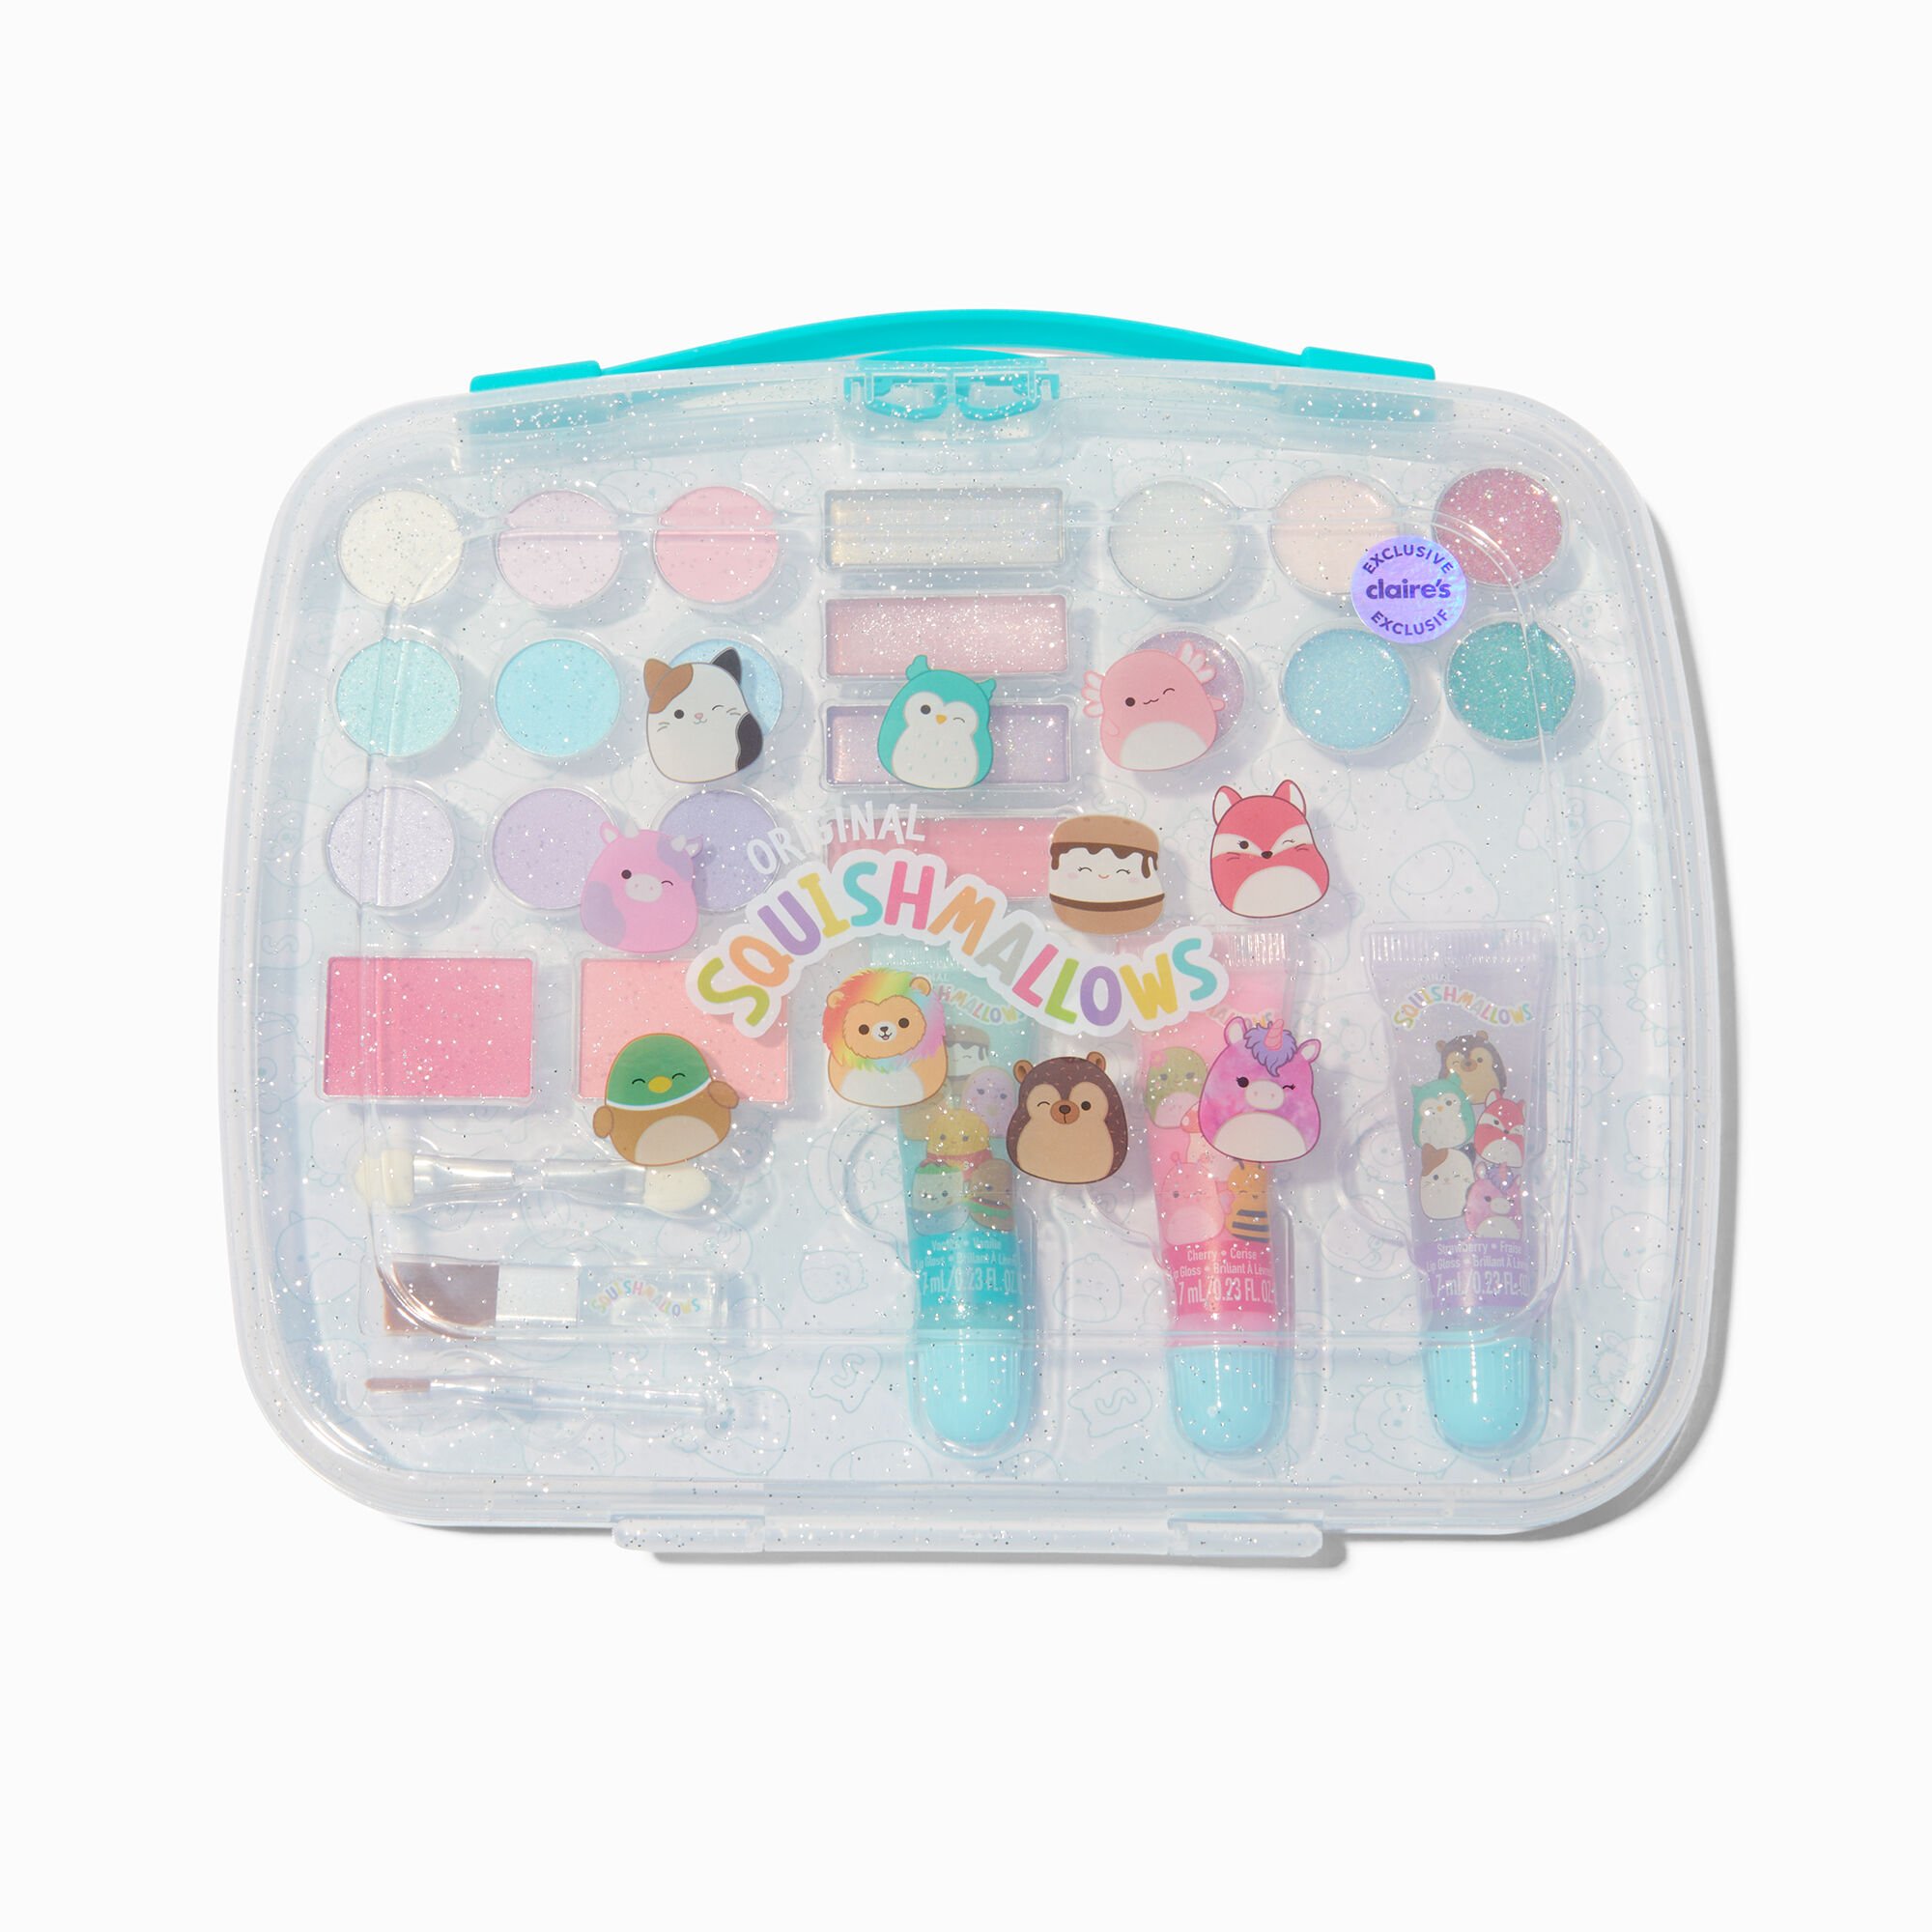 View Claires Squishmallows Glitter Makeup Case information